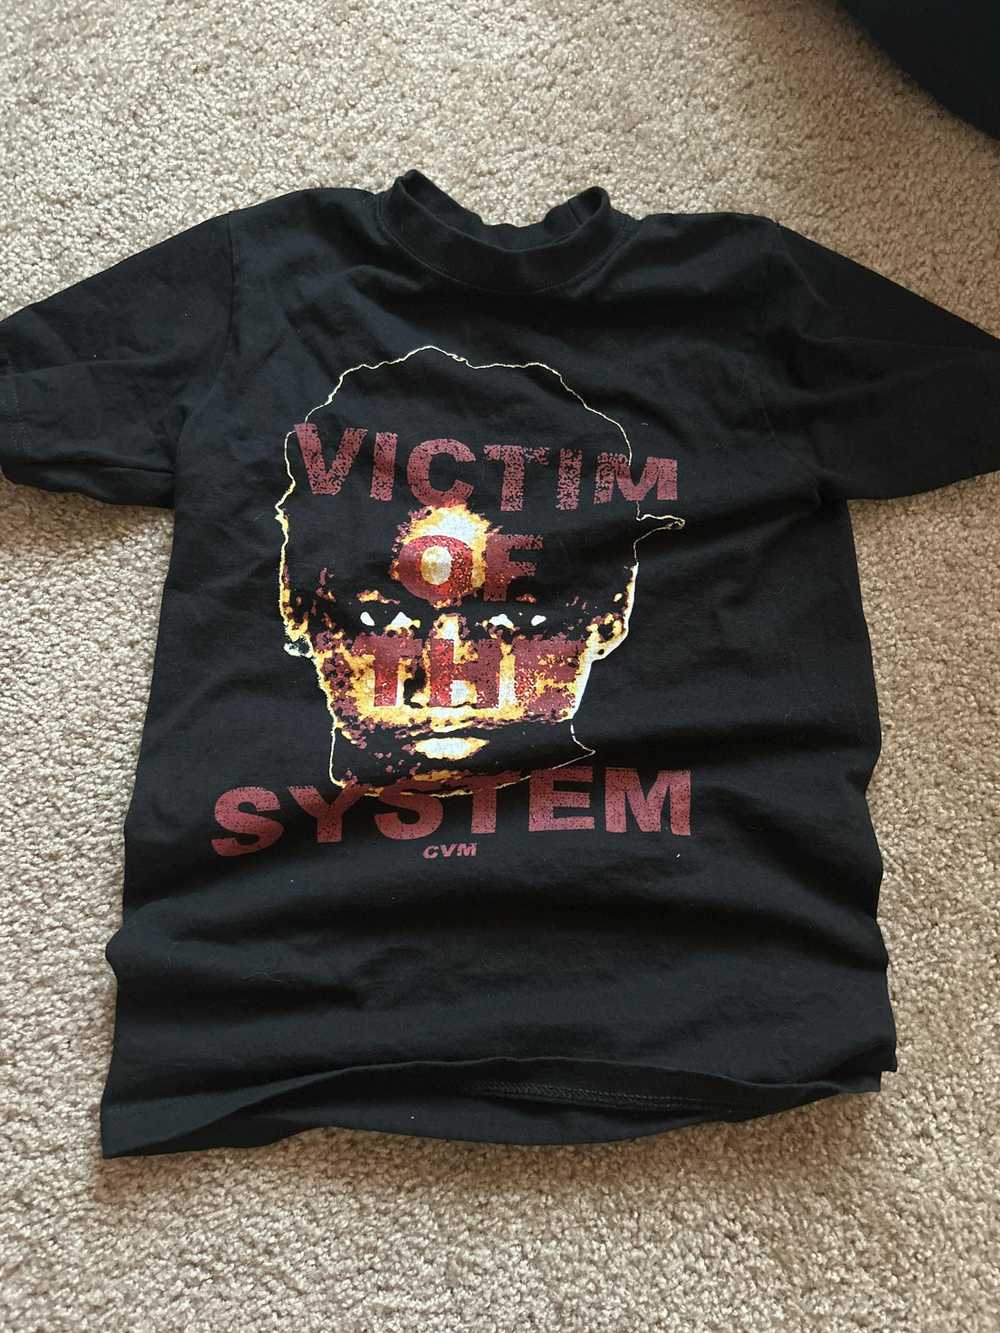 Made In Usa CVM VICTIM OF THE SYSTEM - image 1